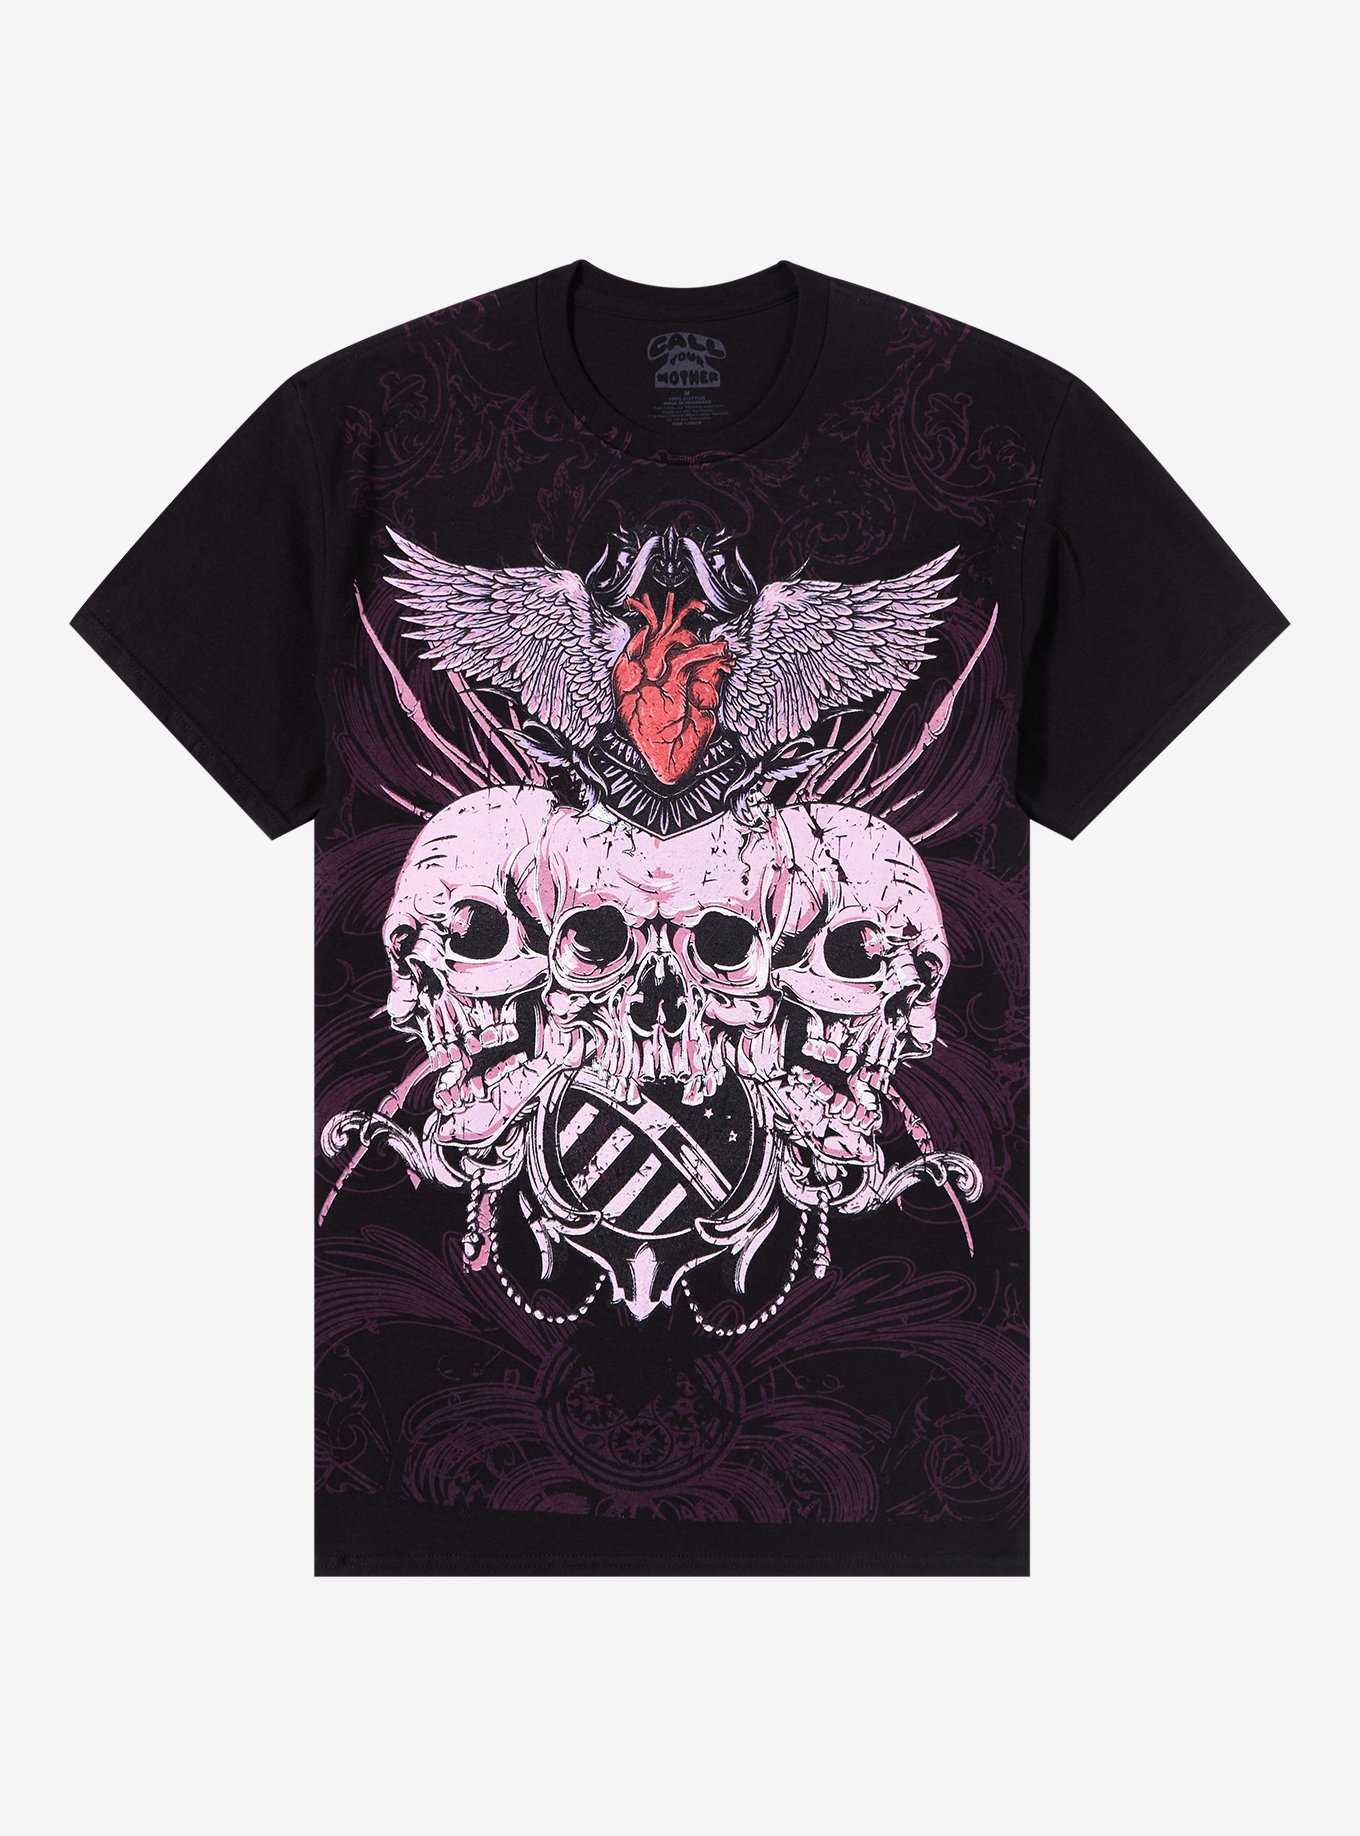 Skull Trio Winged Heart Boyfriend Fit Girls T-Shirt By Call Your Mother, , hi-res